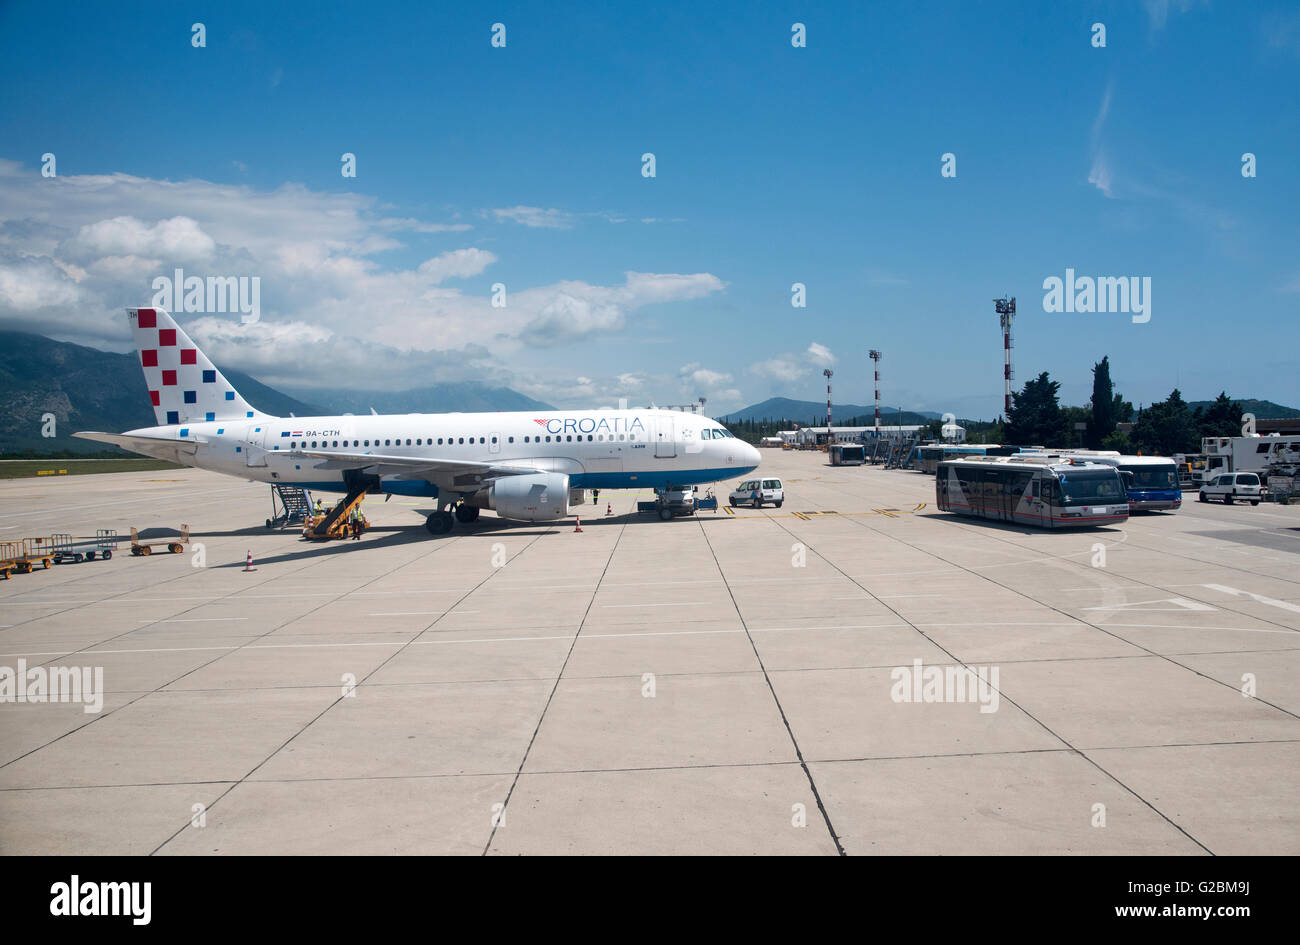 DUBROVNIK INTERNATIONAL AIRPORT CROATIA - MAY 2016 - A Croatia Airlines jet on the apron at Dubrovnik Airport Stock Photo